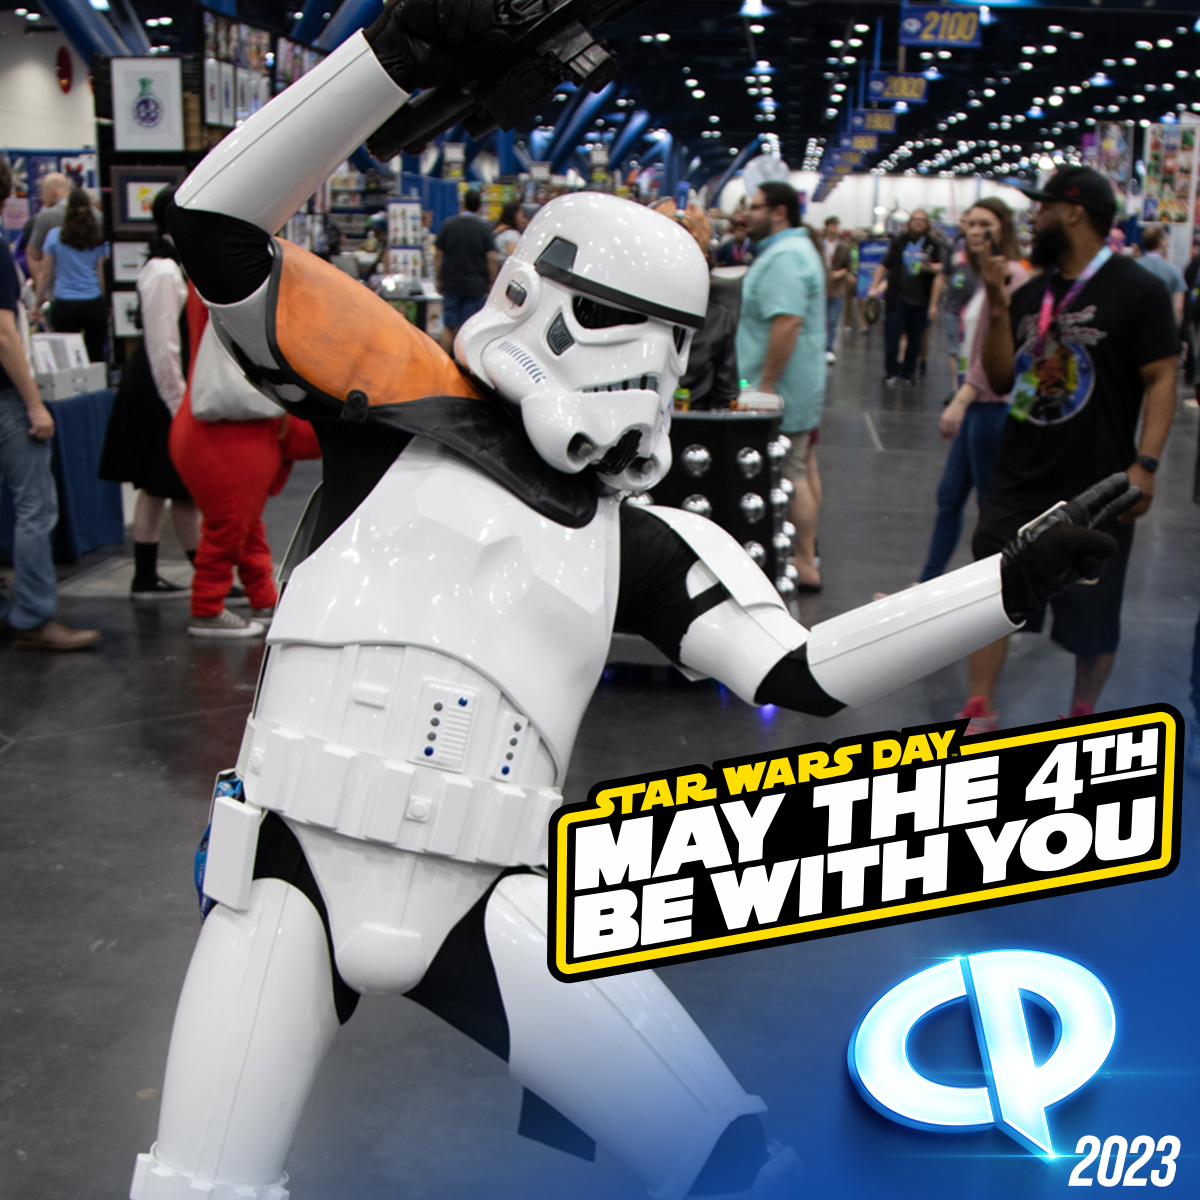 🌟 May the Fourth be with you as we celebrate #StarWarsDay in style with some groovy stormtrooper moves! 🕺💫 Whether you're a Jedi, Sith, or just a fan of the Force, let's dance our way through the galaxy! 💃✨ #MayTheFourth #CP2024 📸: Mario Herrera